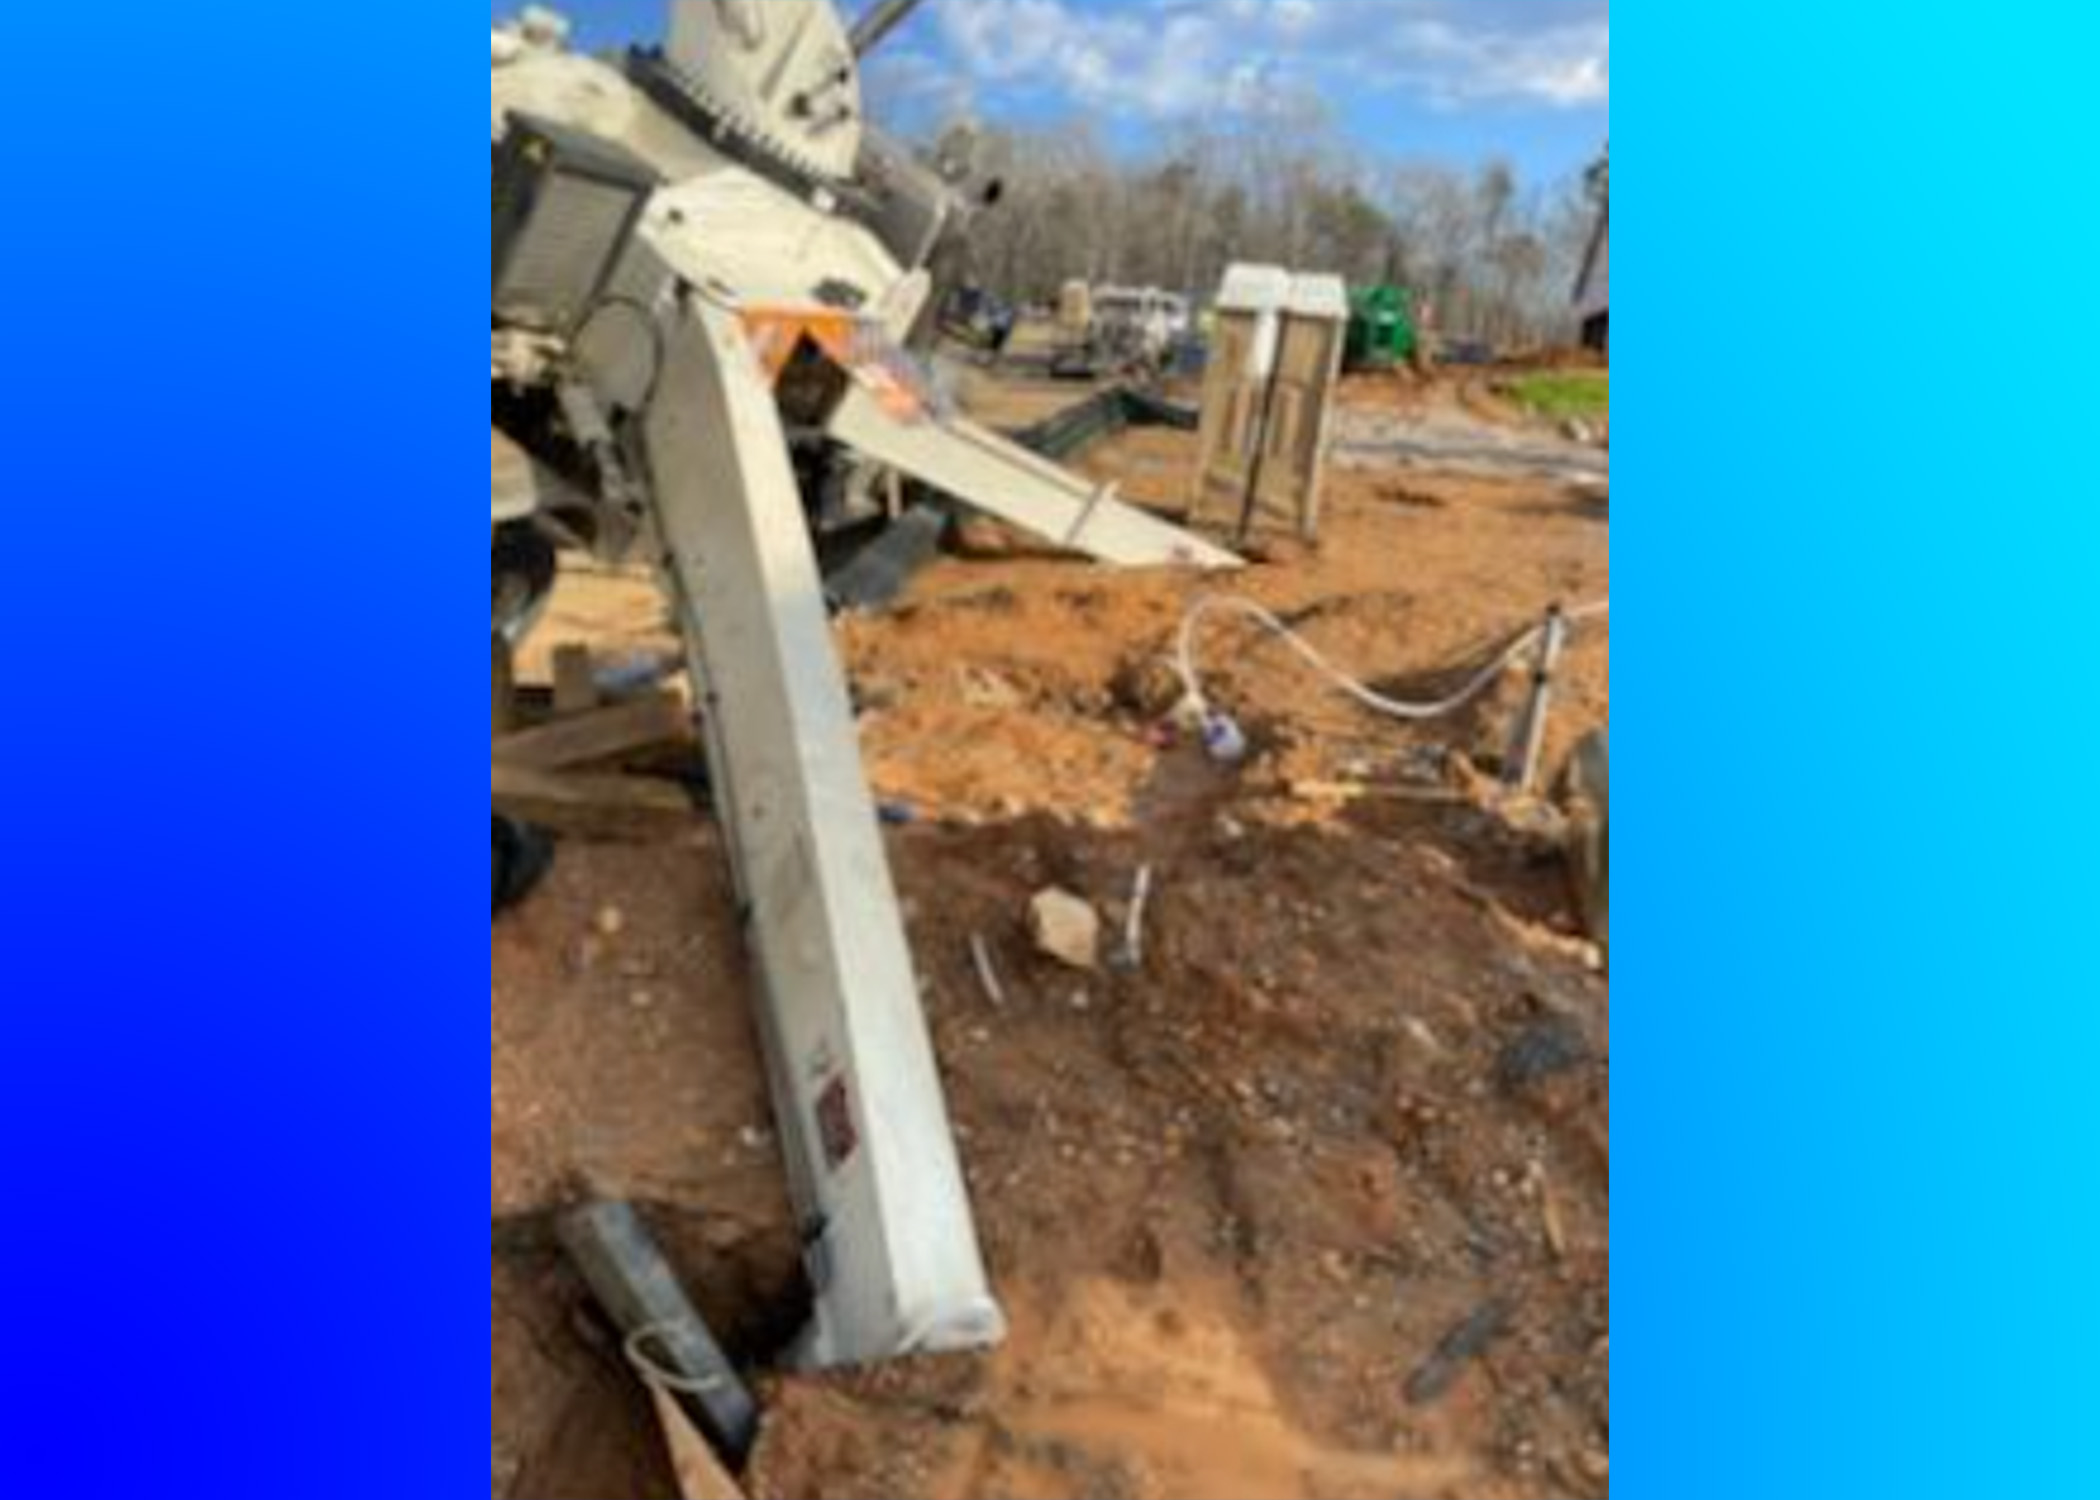 42-year-old construction worker killed in workplace accident in Pinson